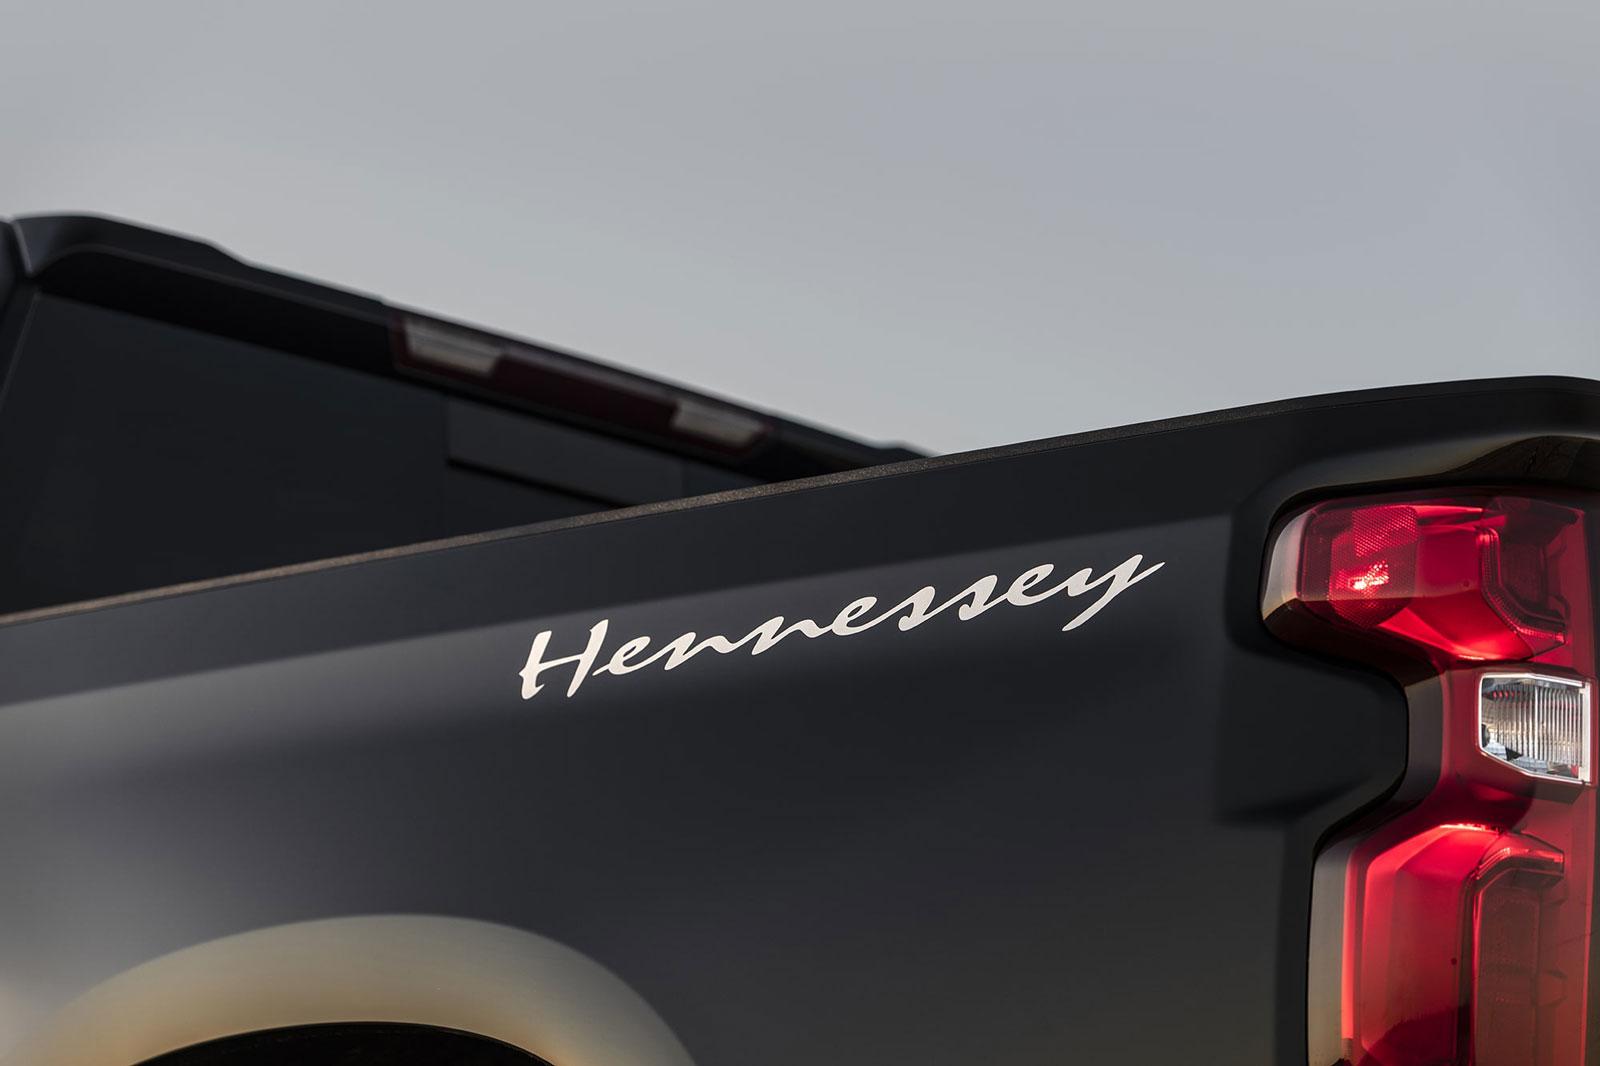 Hennessey graphic on the rear bumper of a black Chevy Silverado